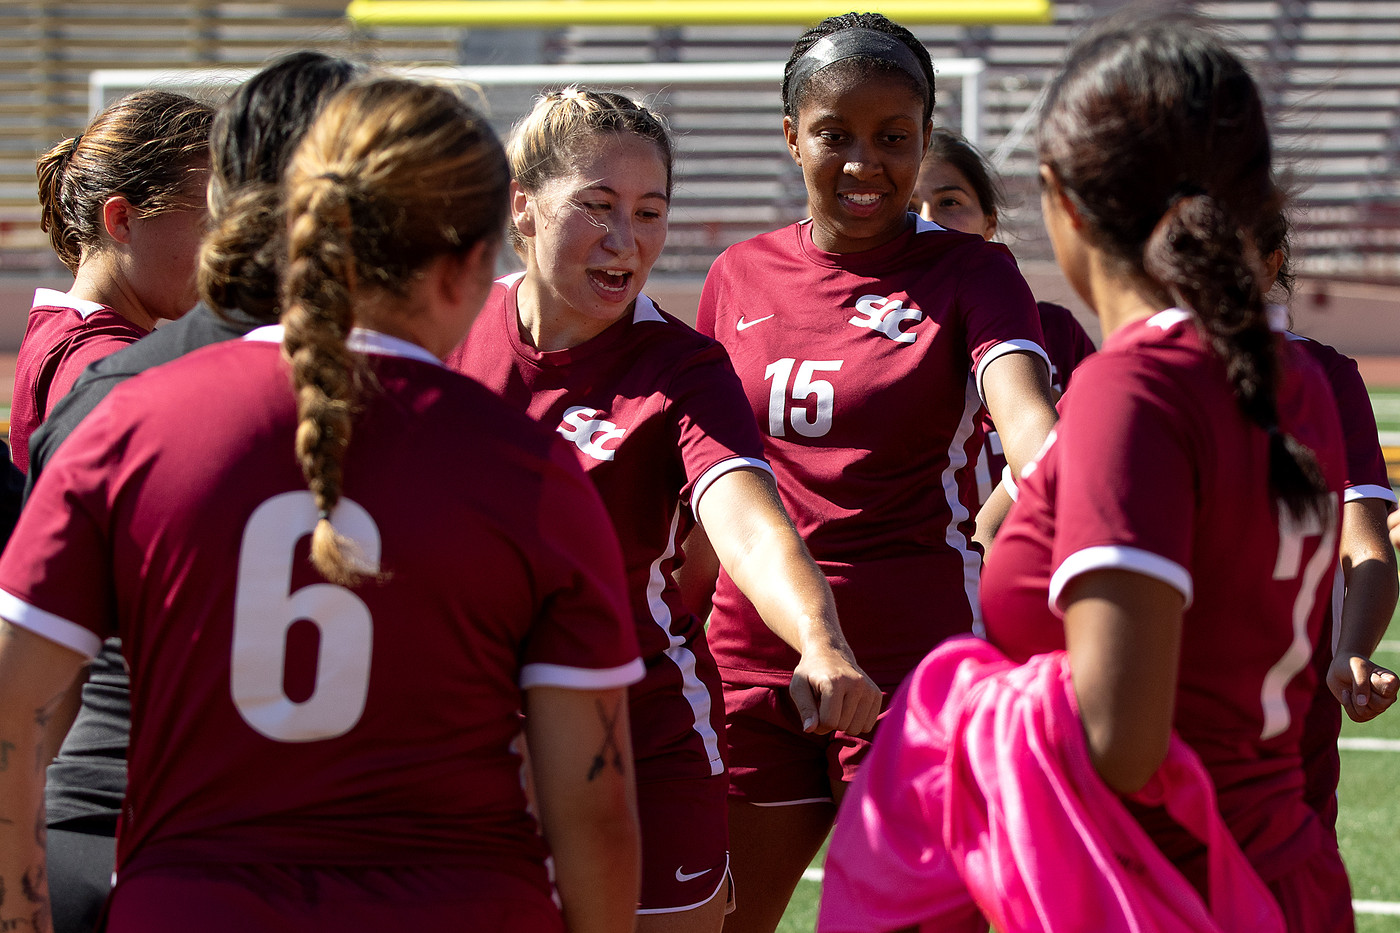 The women's Soccer season came to an end on Friday with a 3-0 loss at American River